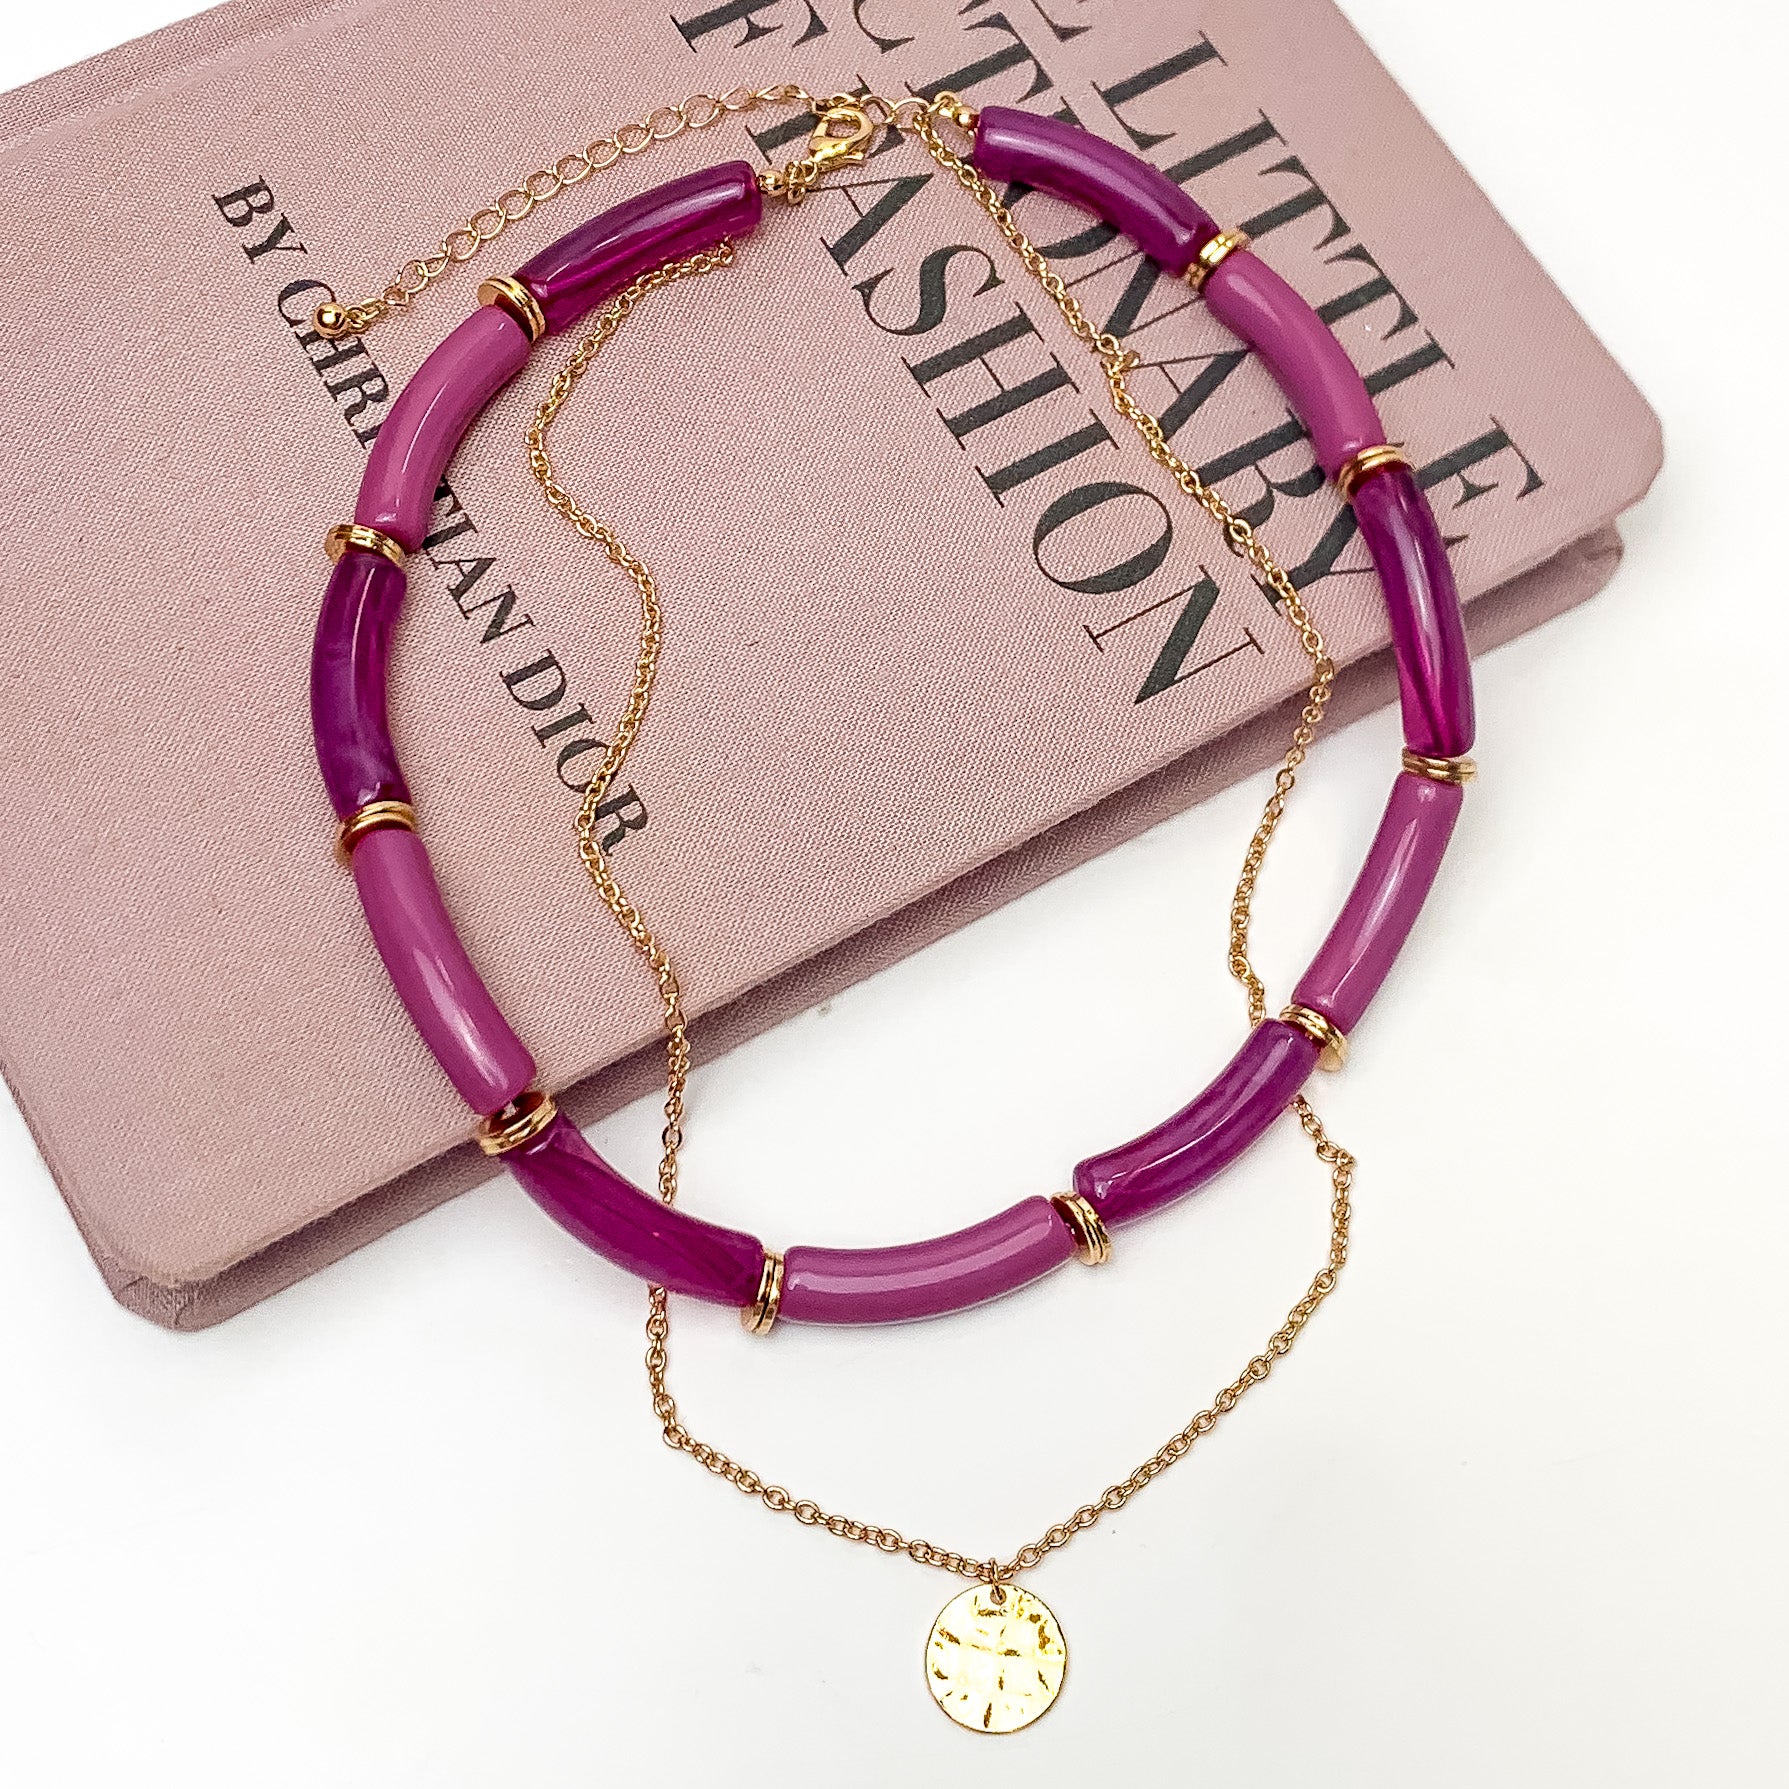 Perfect Paradise Tube Necklace With Second Gold Tone Chain Necklace In Purple. Pictured on a white background with the necklace laying on a book.